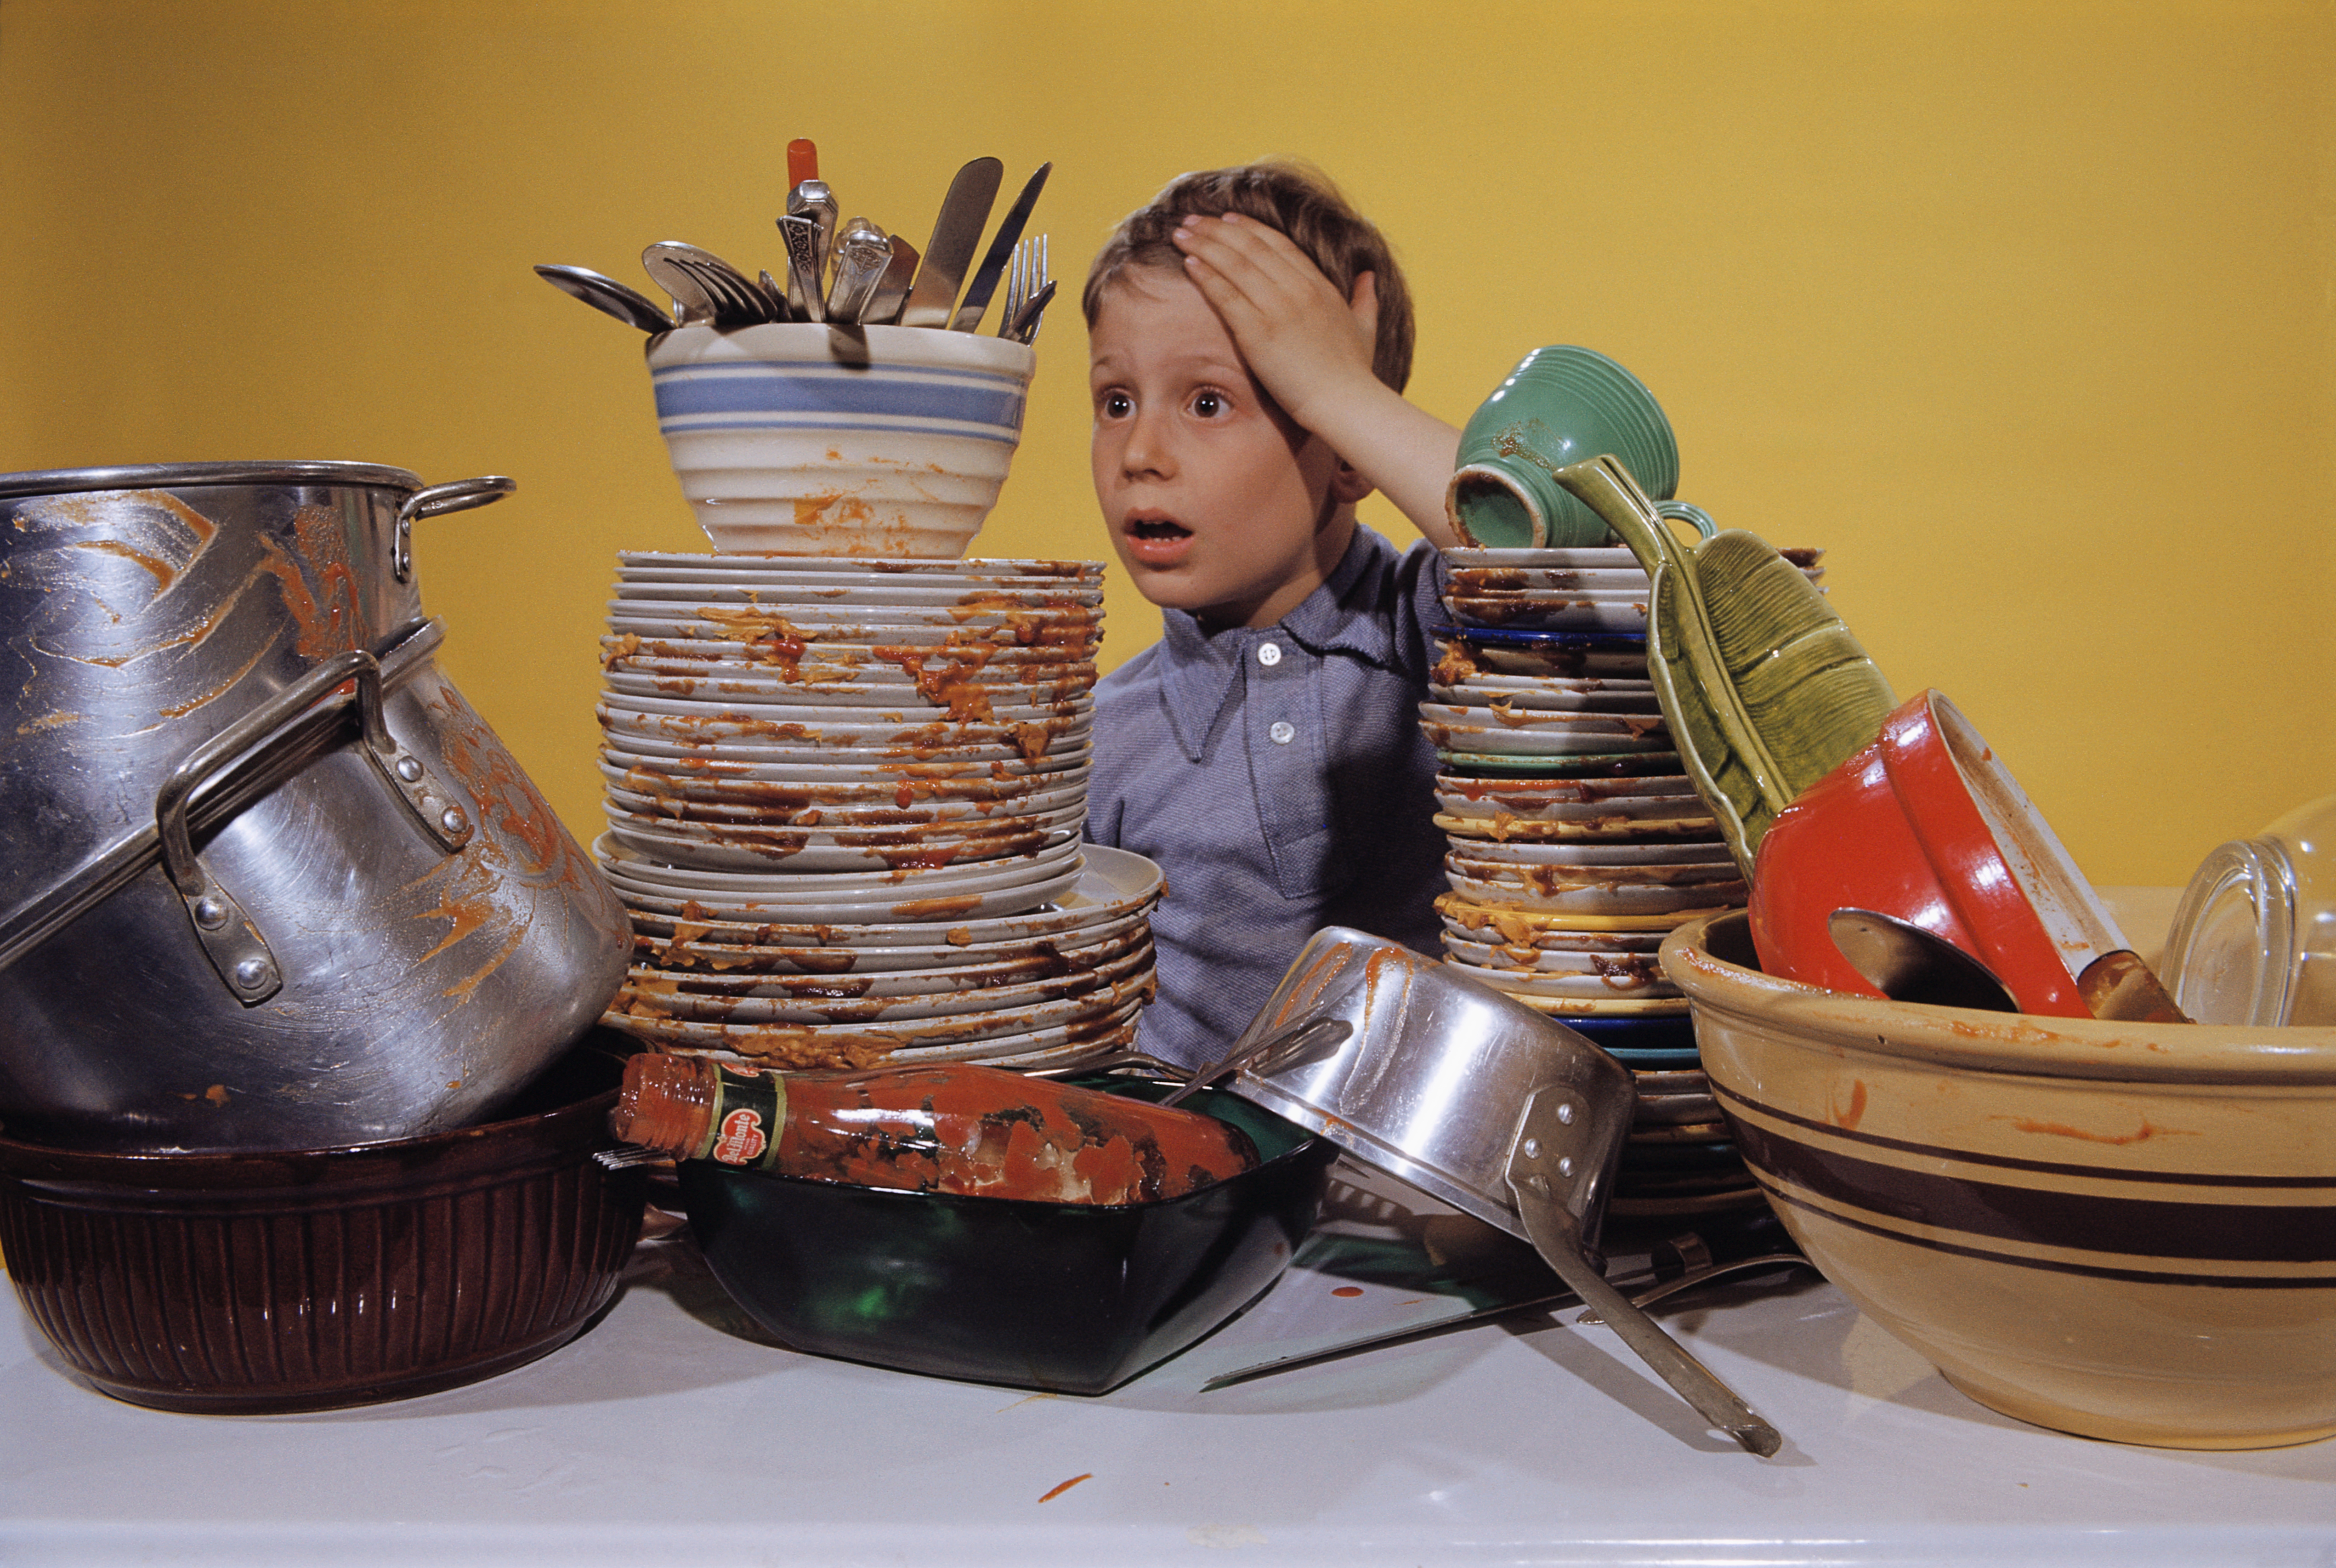 A young boy with an overwhelmed expression on his face stands behind a counter, surrounded by stacks of dirty dishes.